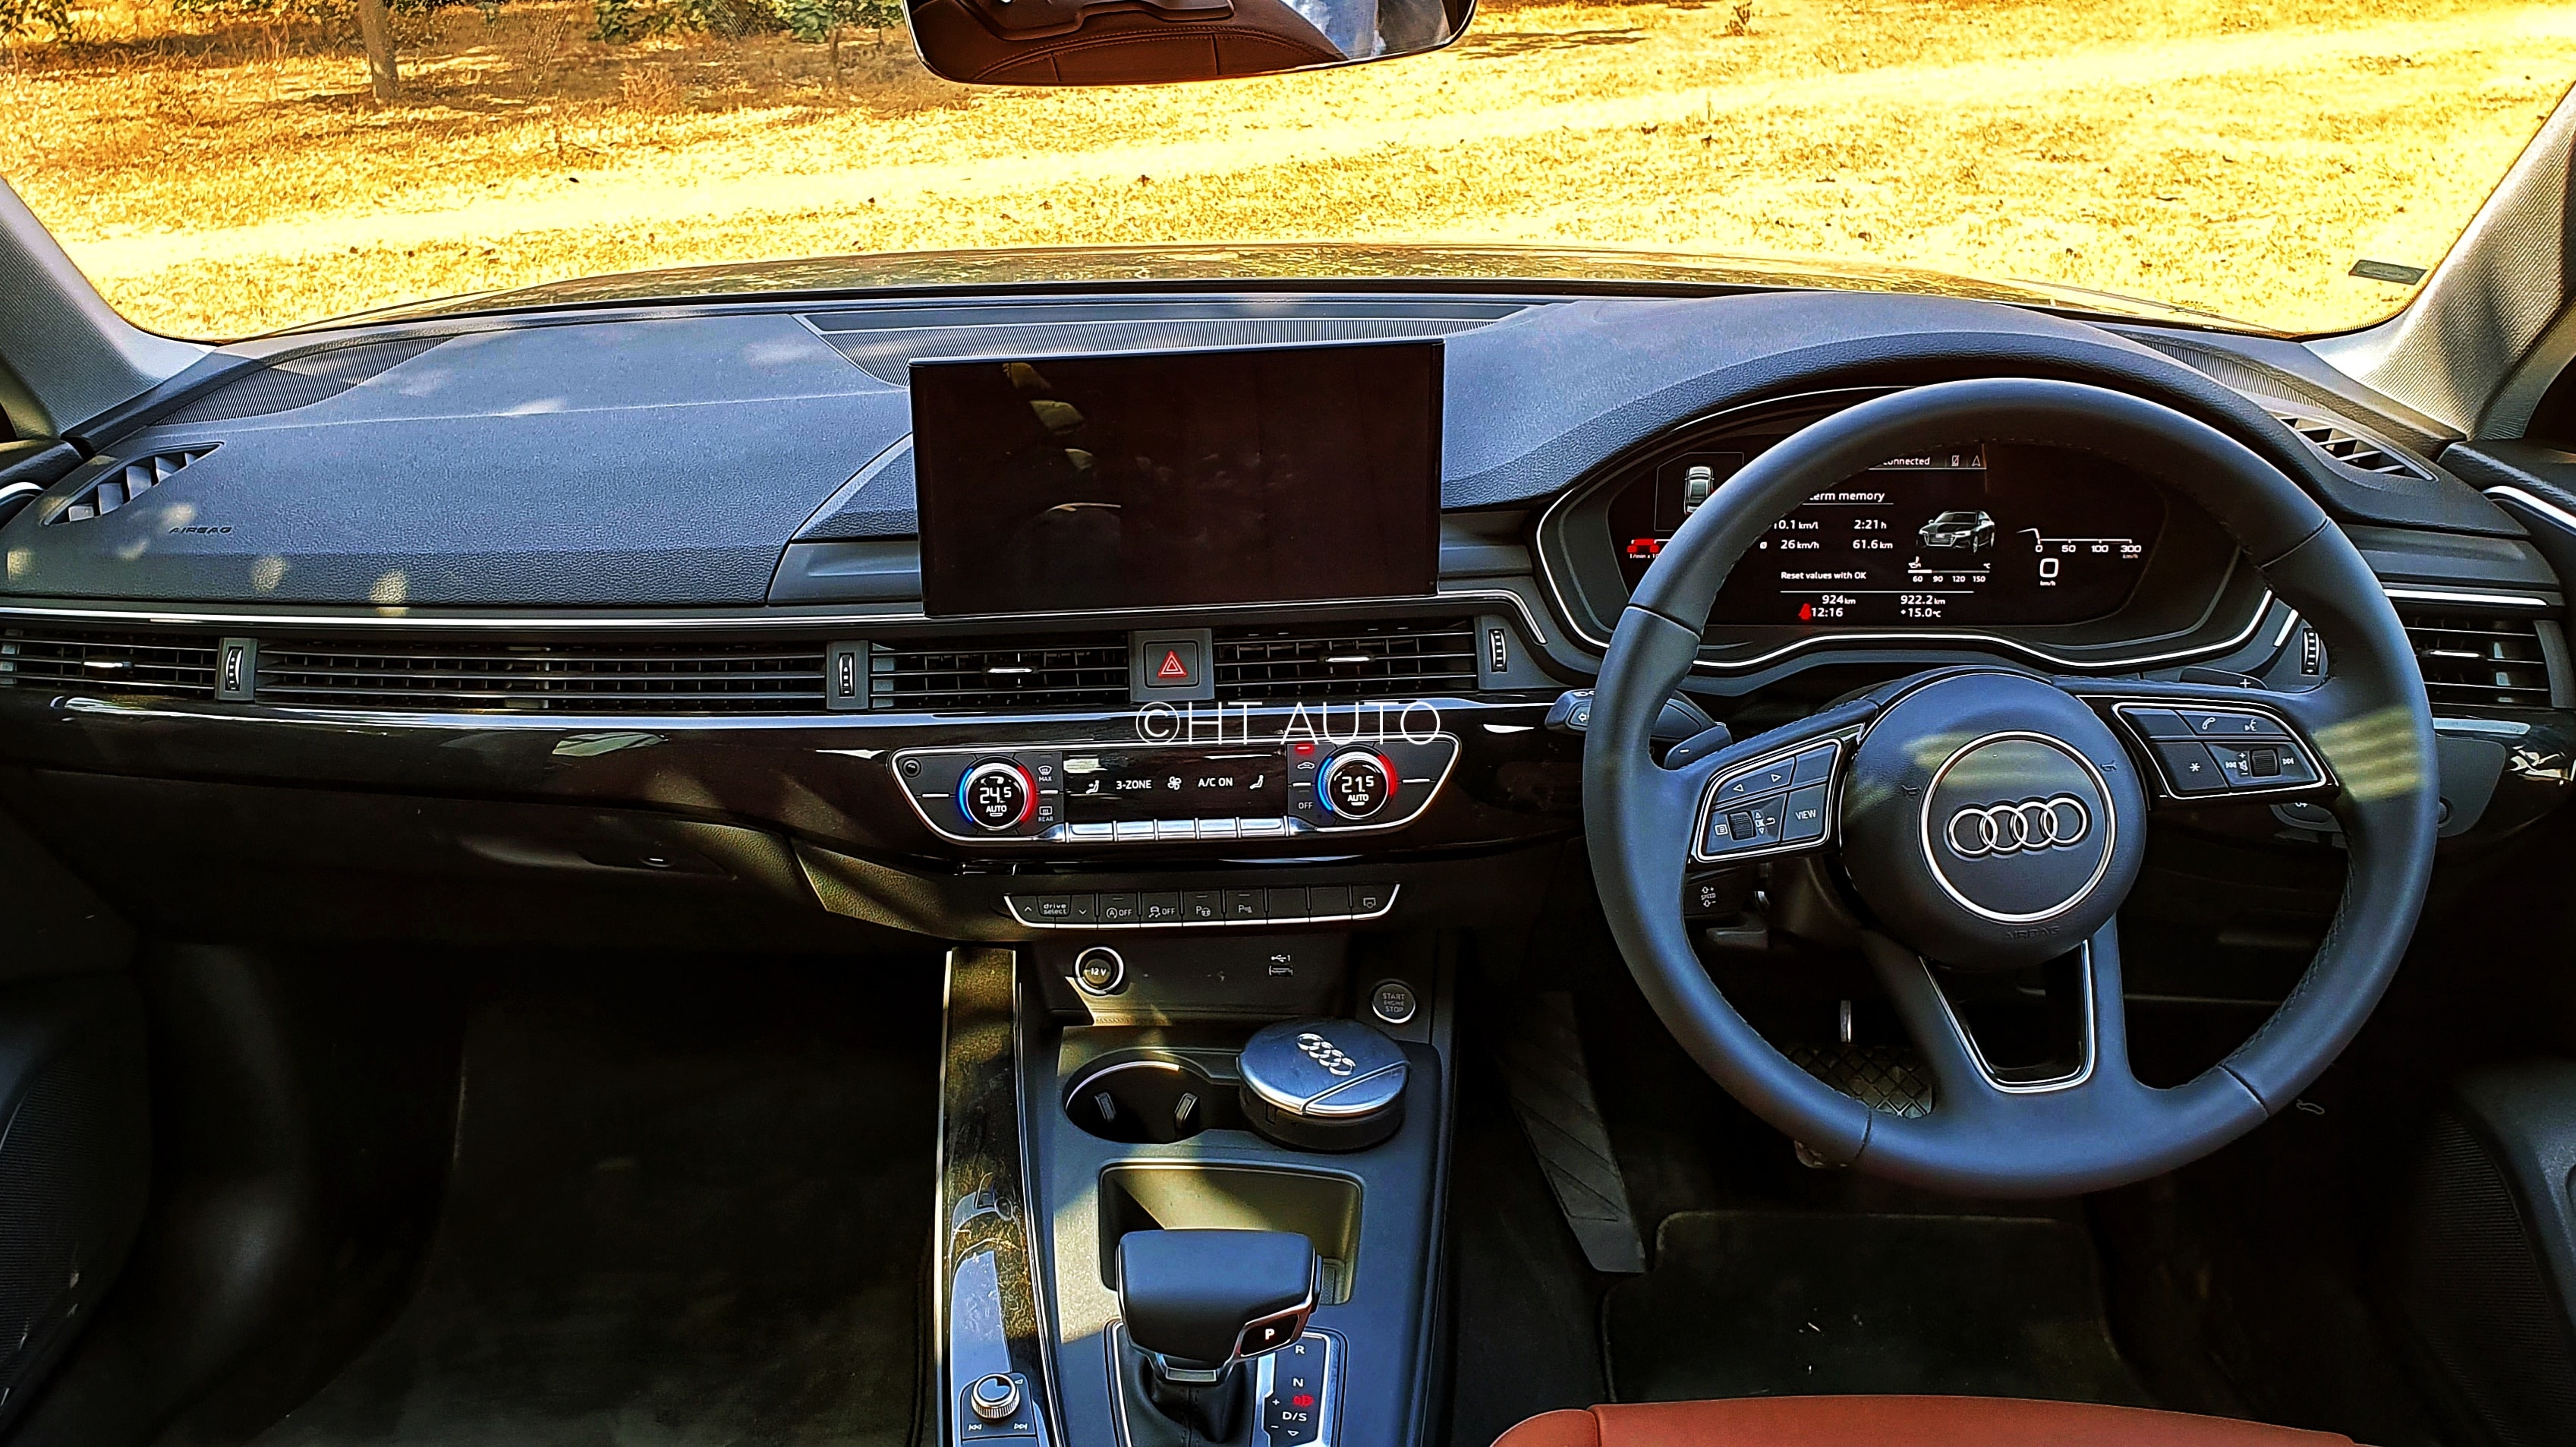 The standalone 10.1-inch infotainment system sits much like a crown on the dashboard of the new Audi A4. High-quality materials give the A4 a premium cabin appeal. (HT Auto/Sabyasachi Dasgupta)